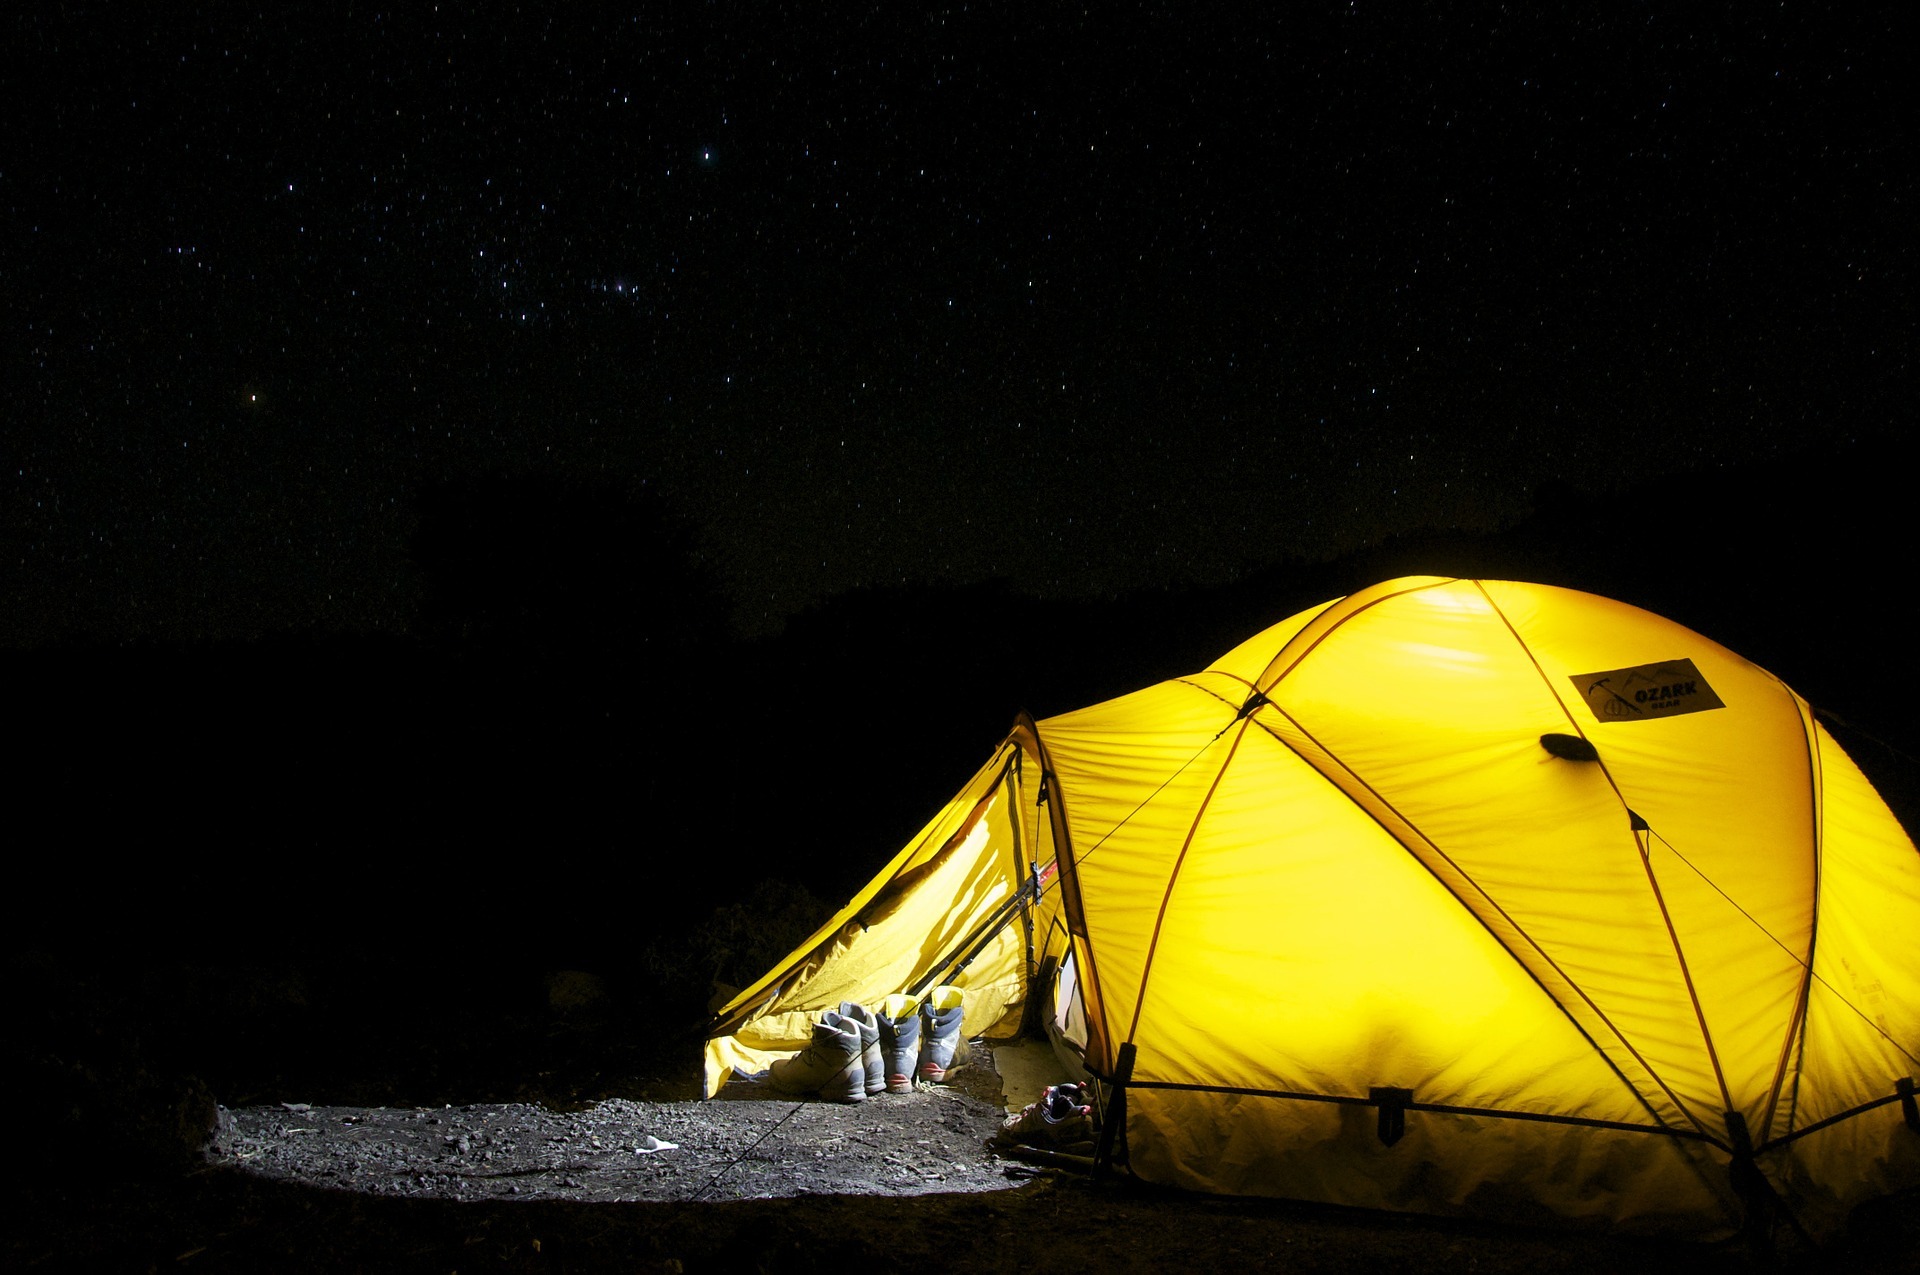 Camping tent placed underneath the stars